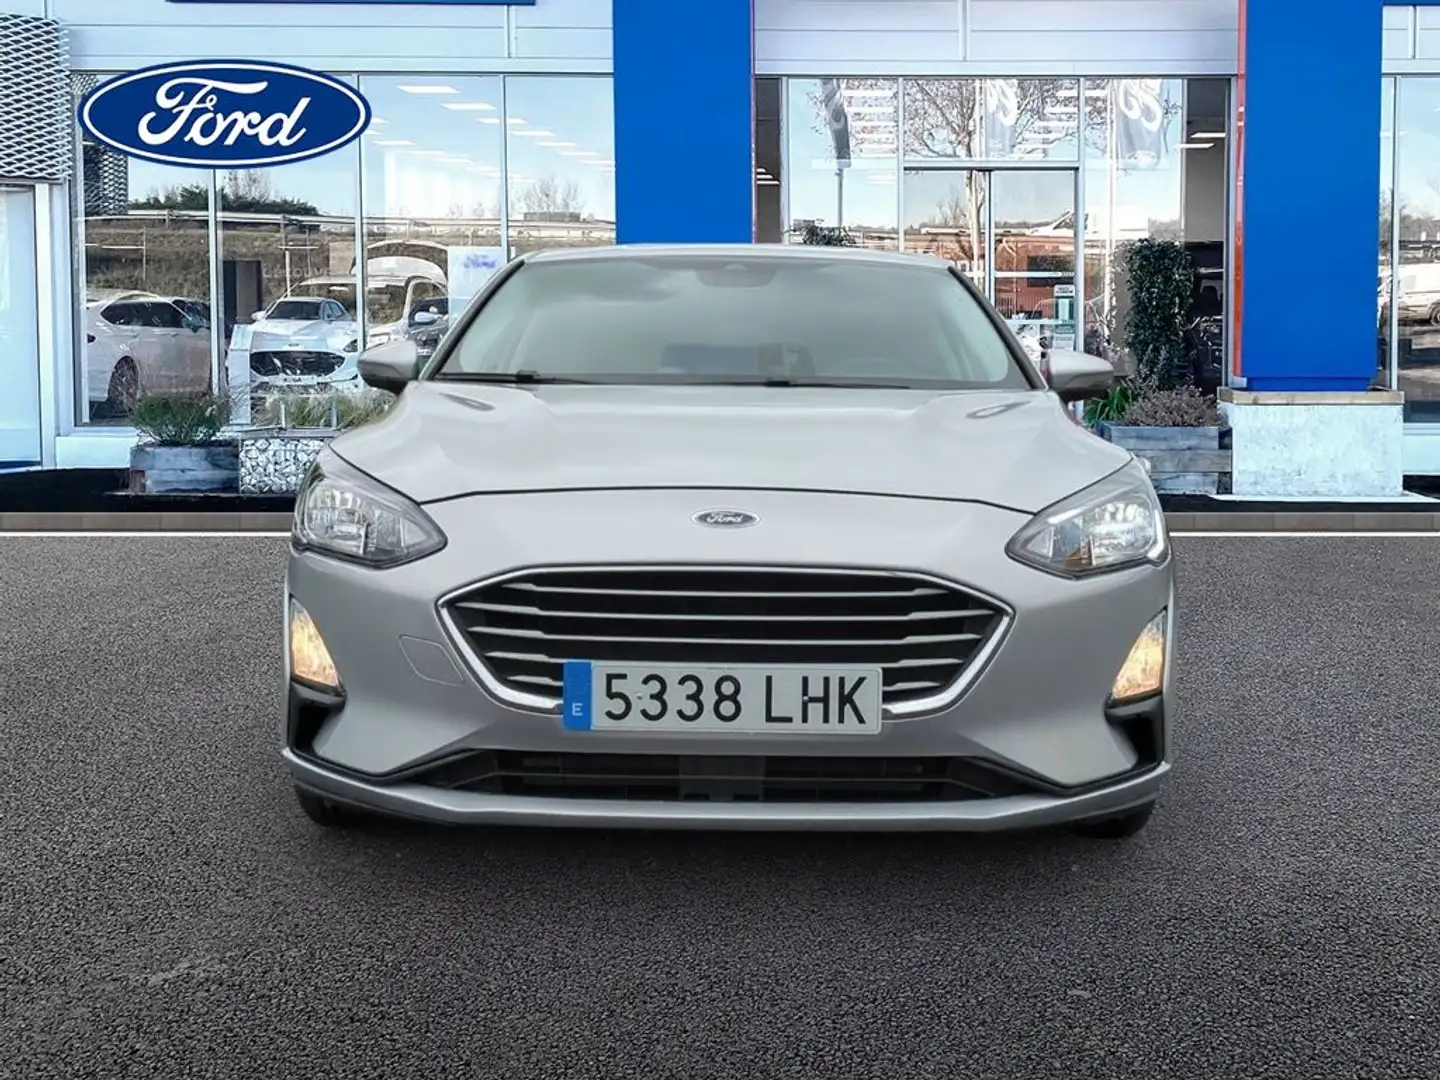 Ford Focus 1.0 Ecoboost Trend+ 125 - 2